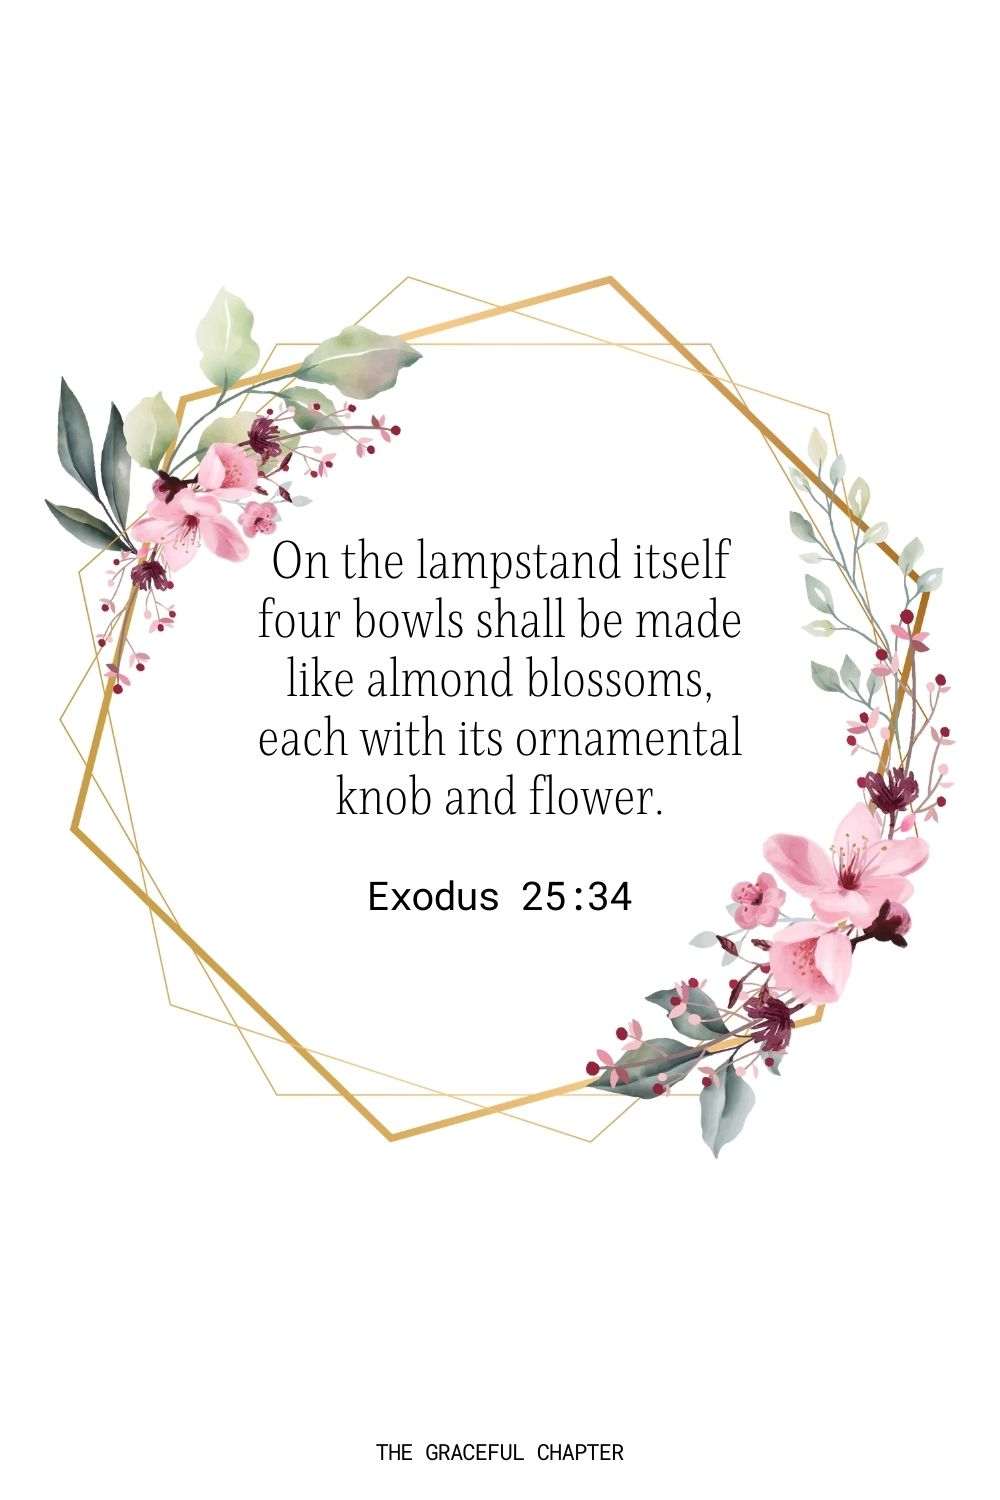 On the lampstand itself four bowls shall be made like almond blossoms, each with its ornamental knob and flower. Exodus 25:34